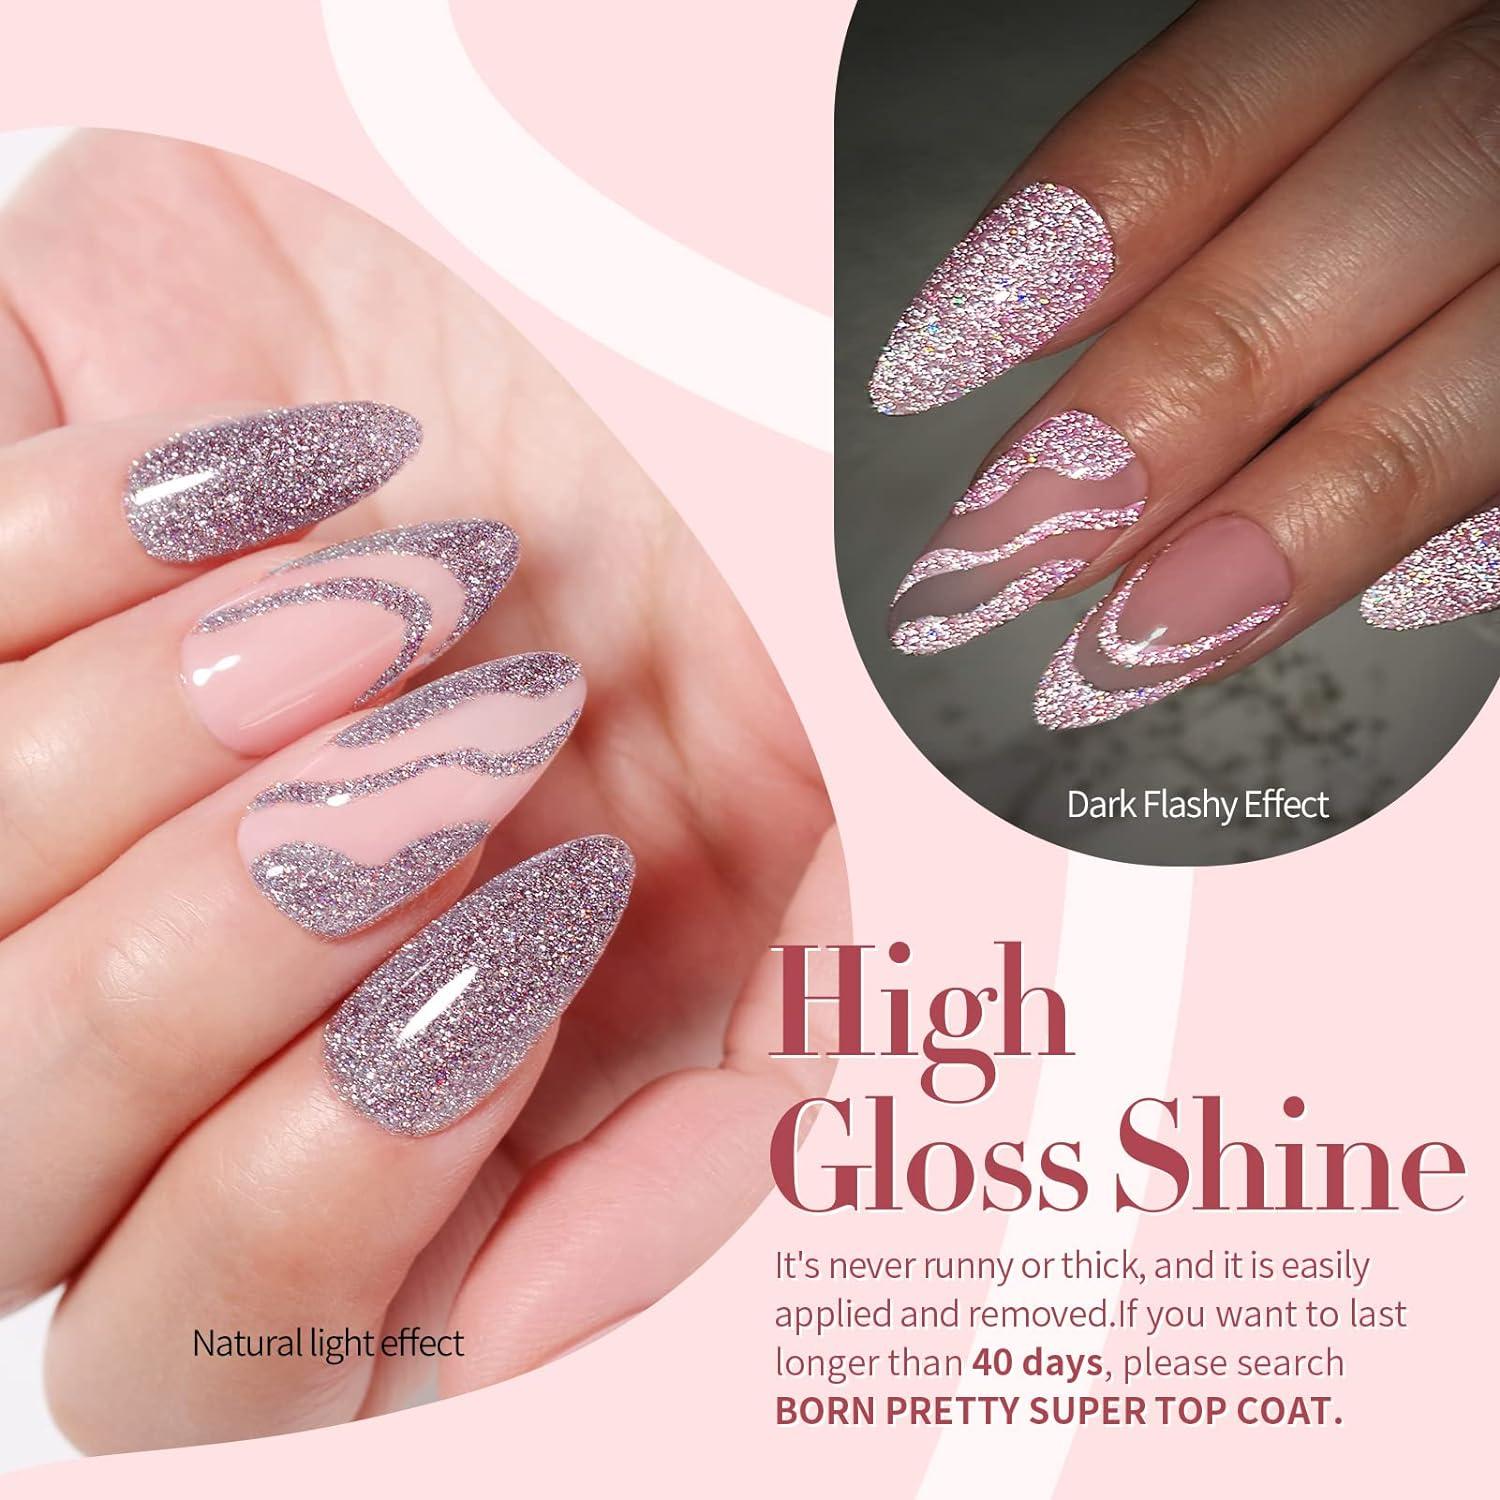 Fanny Flutters – Pastel Pink, Coral Gel Nail Polish | 14 Day Manicure